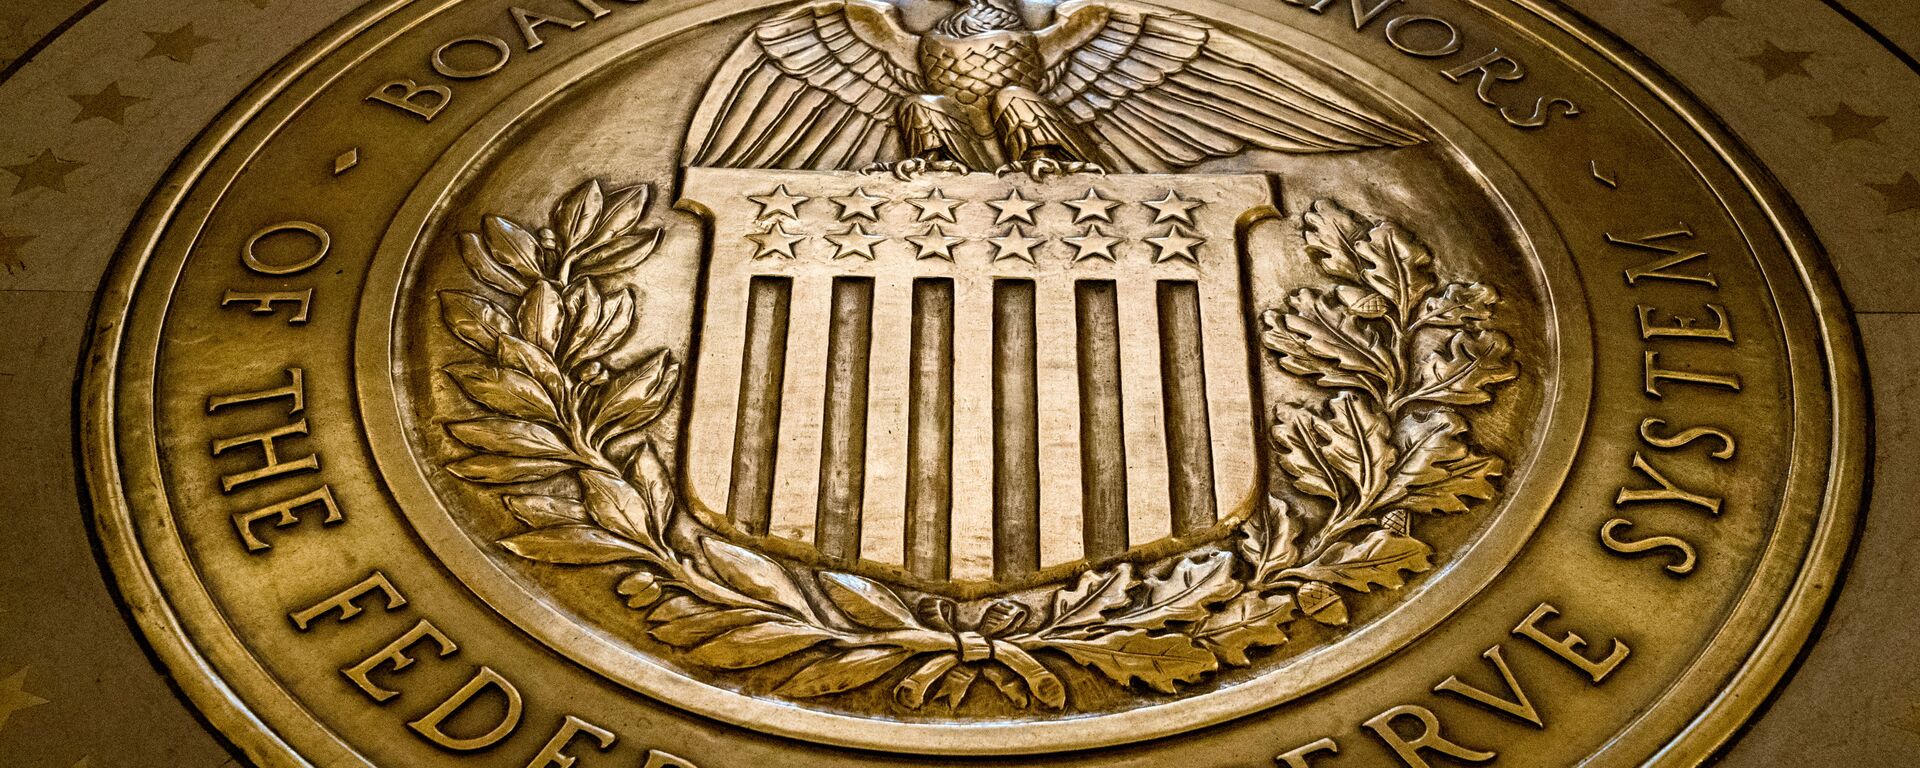 FILE- In this Feb. 5, 2018, file photo, the seal of the Board of Governors of the United States Federal Reserve System is displayed in the ground at the Marriner S. Eccles Federal Reserve Board Building in Washington. Richard Clarida, President Donald Trump's nominee for the No. 2 post at the Federal Reserve, pledged on Tuesday, May 15, to support the Fed's twin goals of stabilizing inflation and maximizing employment while also declaring the importance of the central bank’s independence.  - Sputnik International, 1920, 02.07.2022